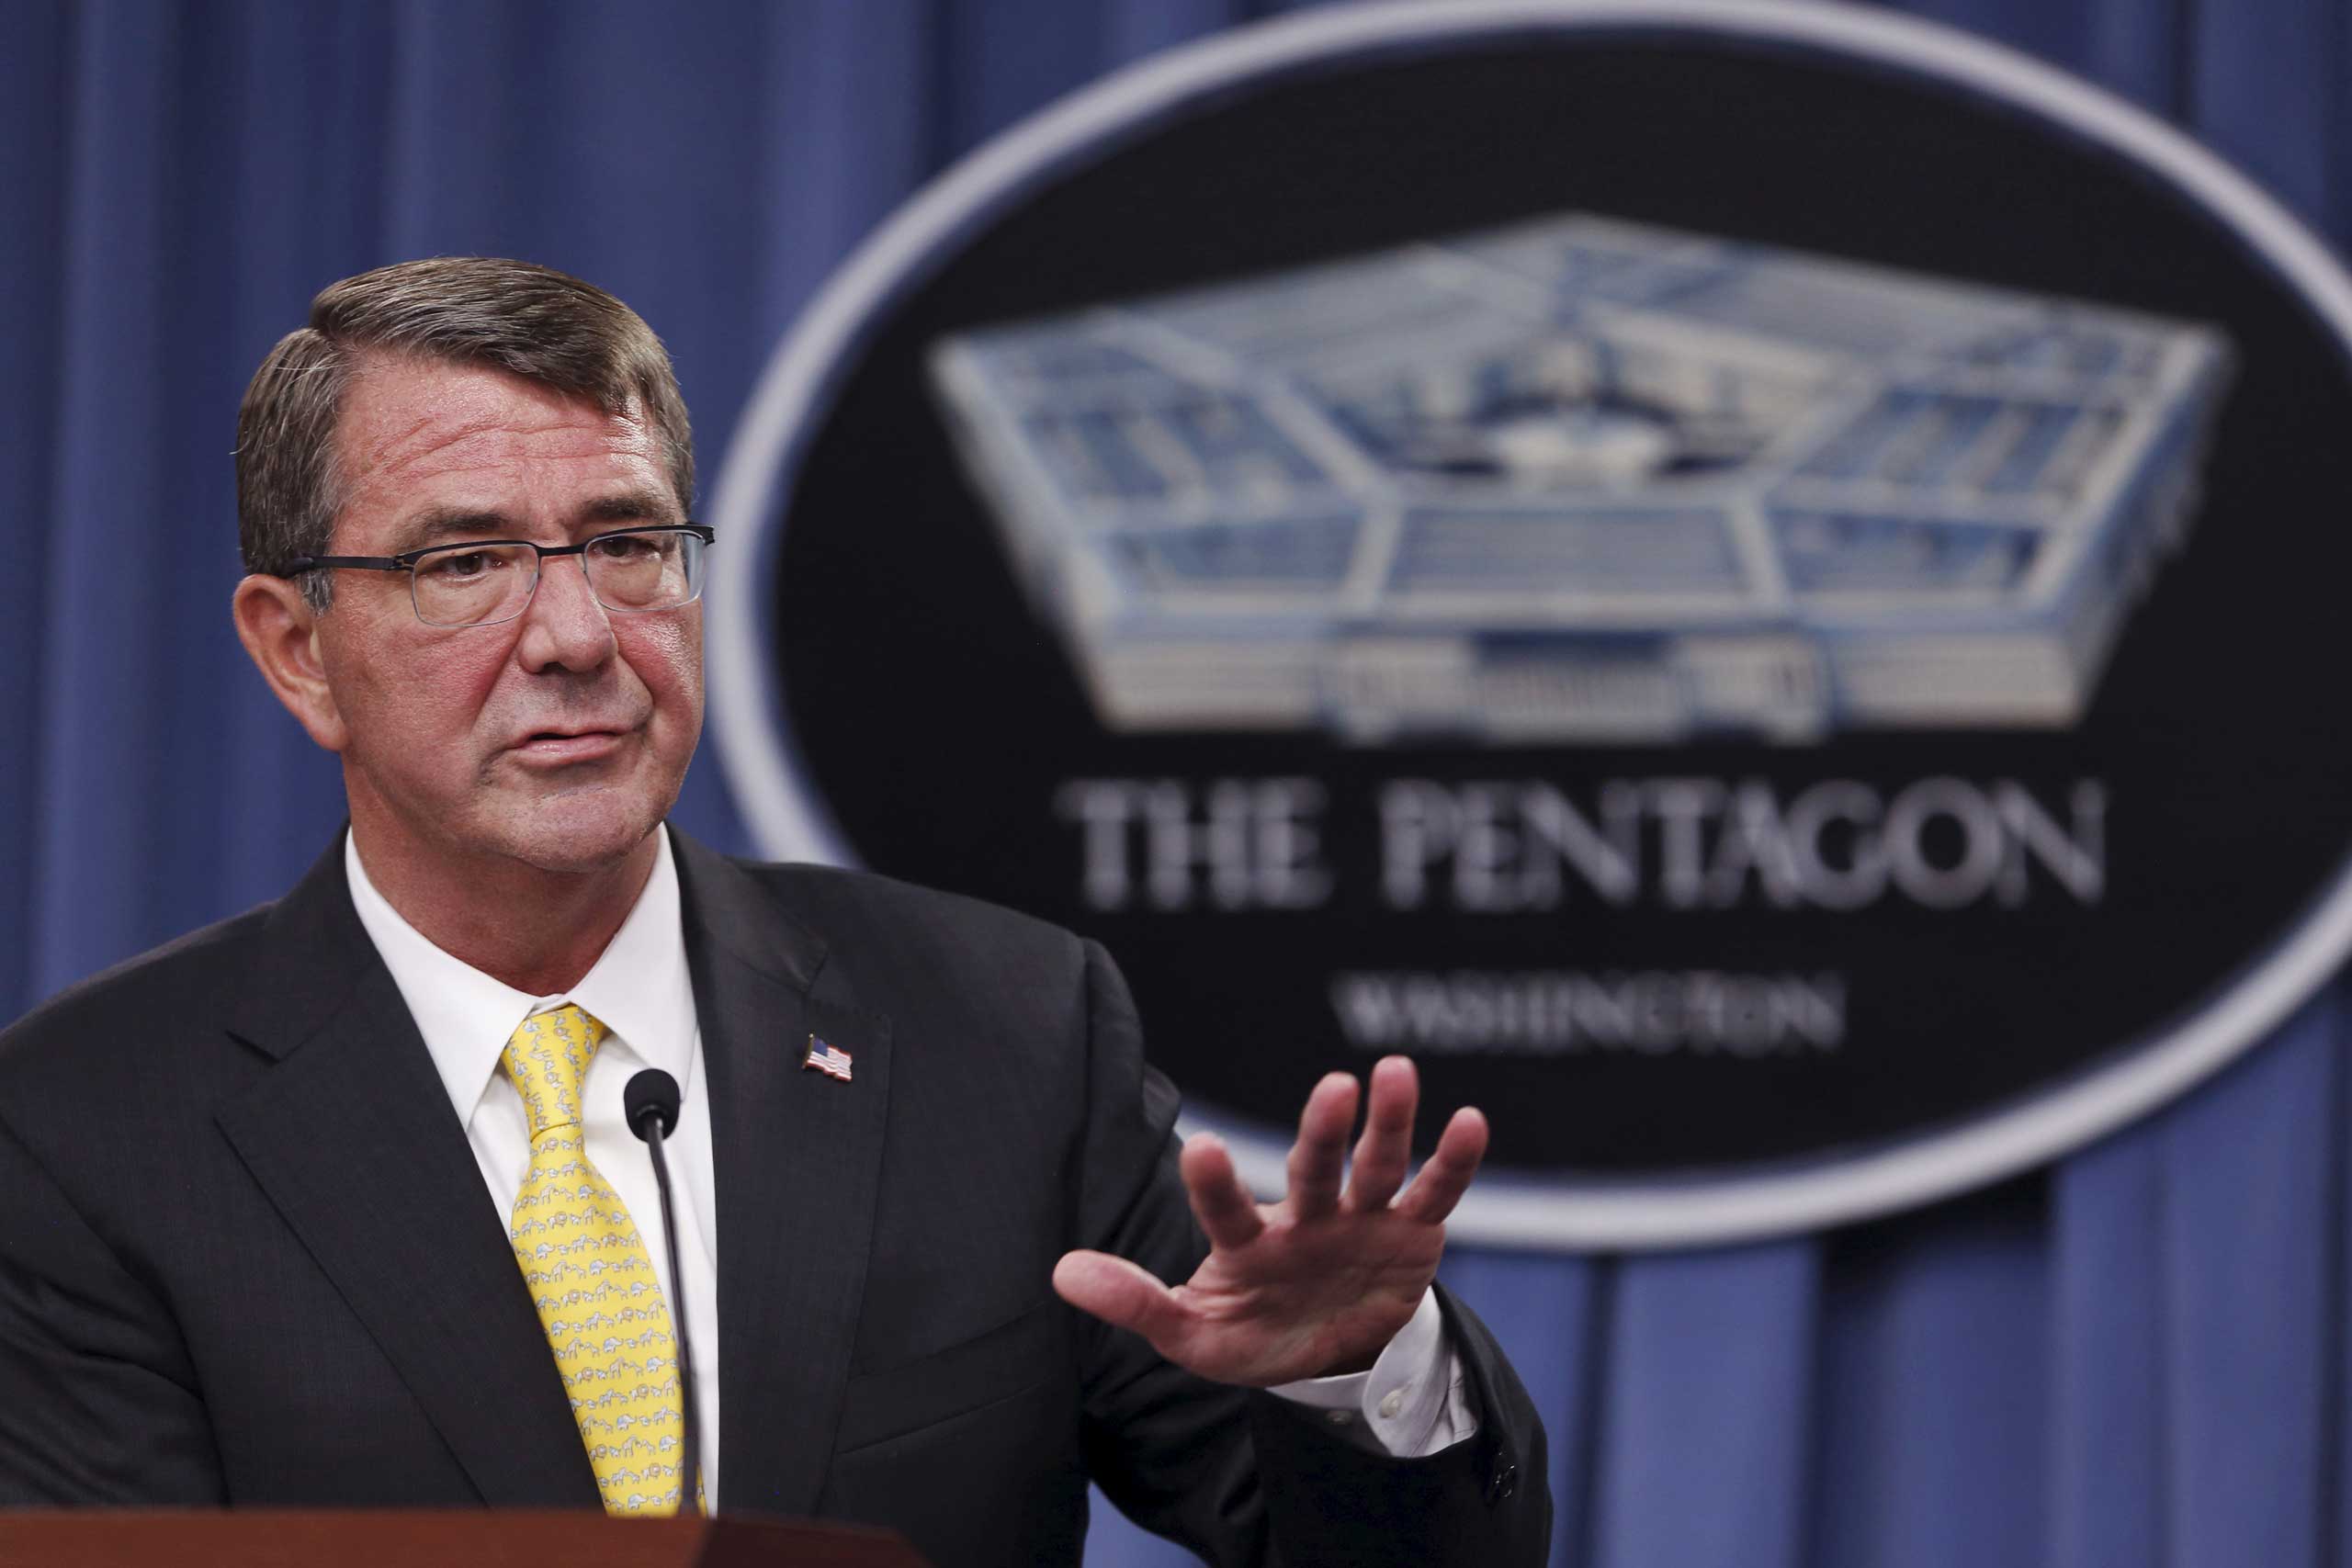 Carter holds a news conference at the Pentagon in Arlington, Virginia